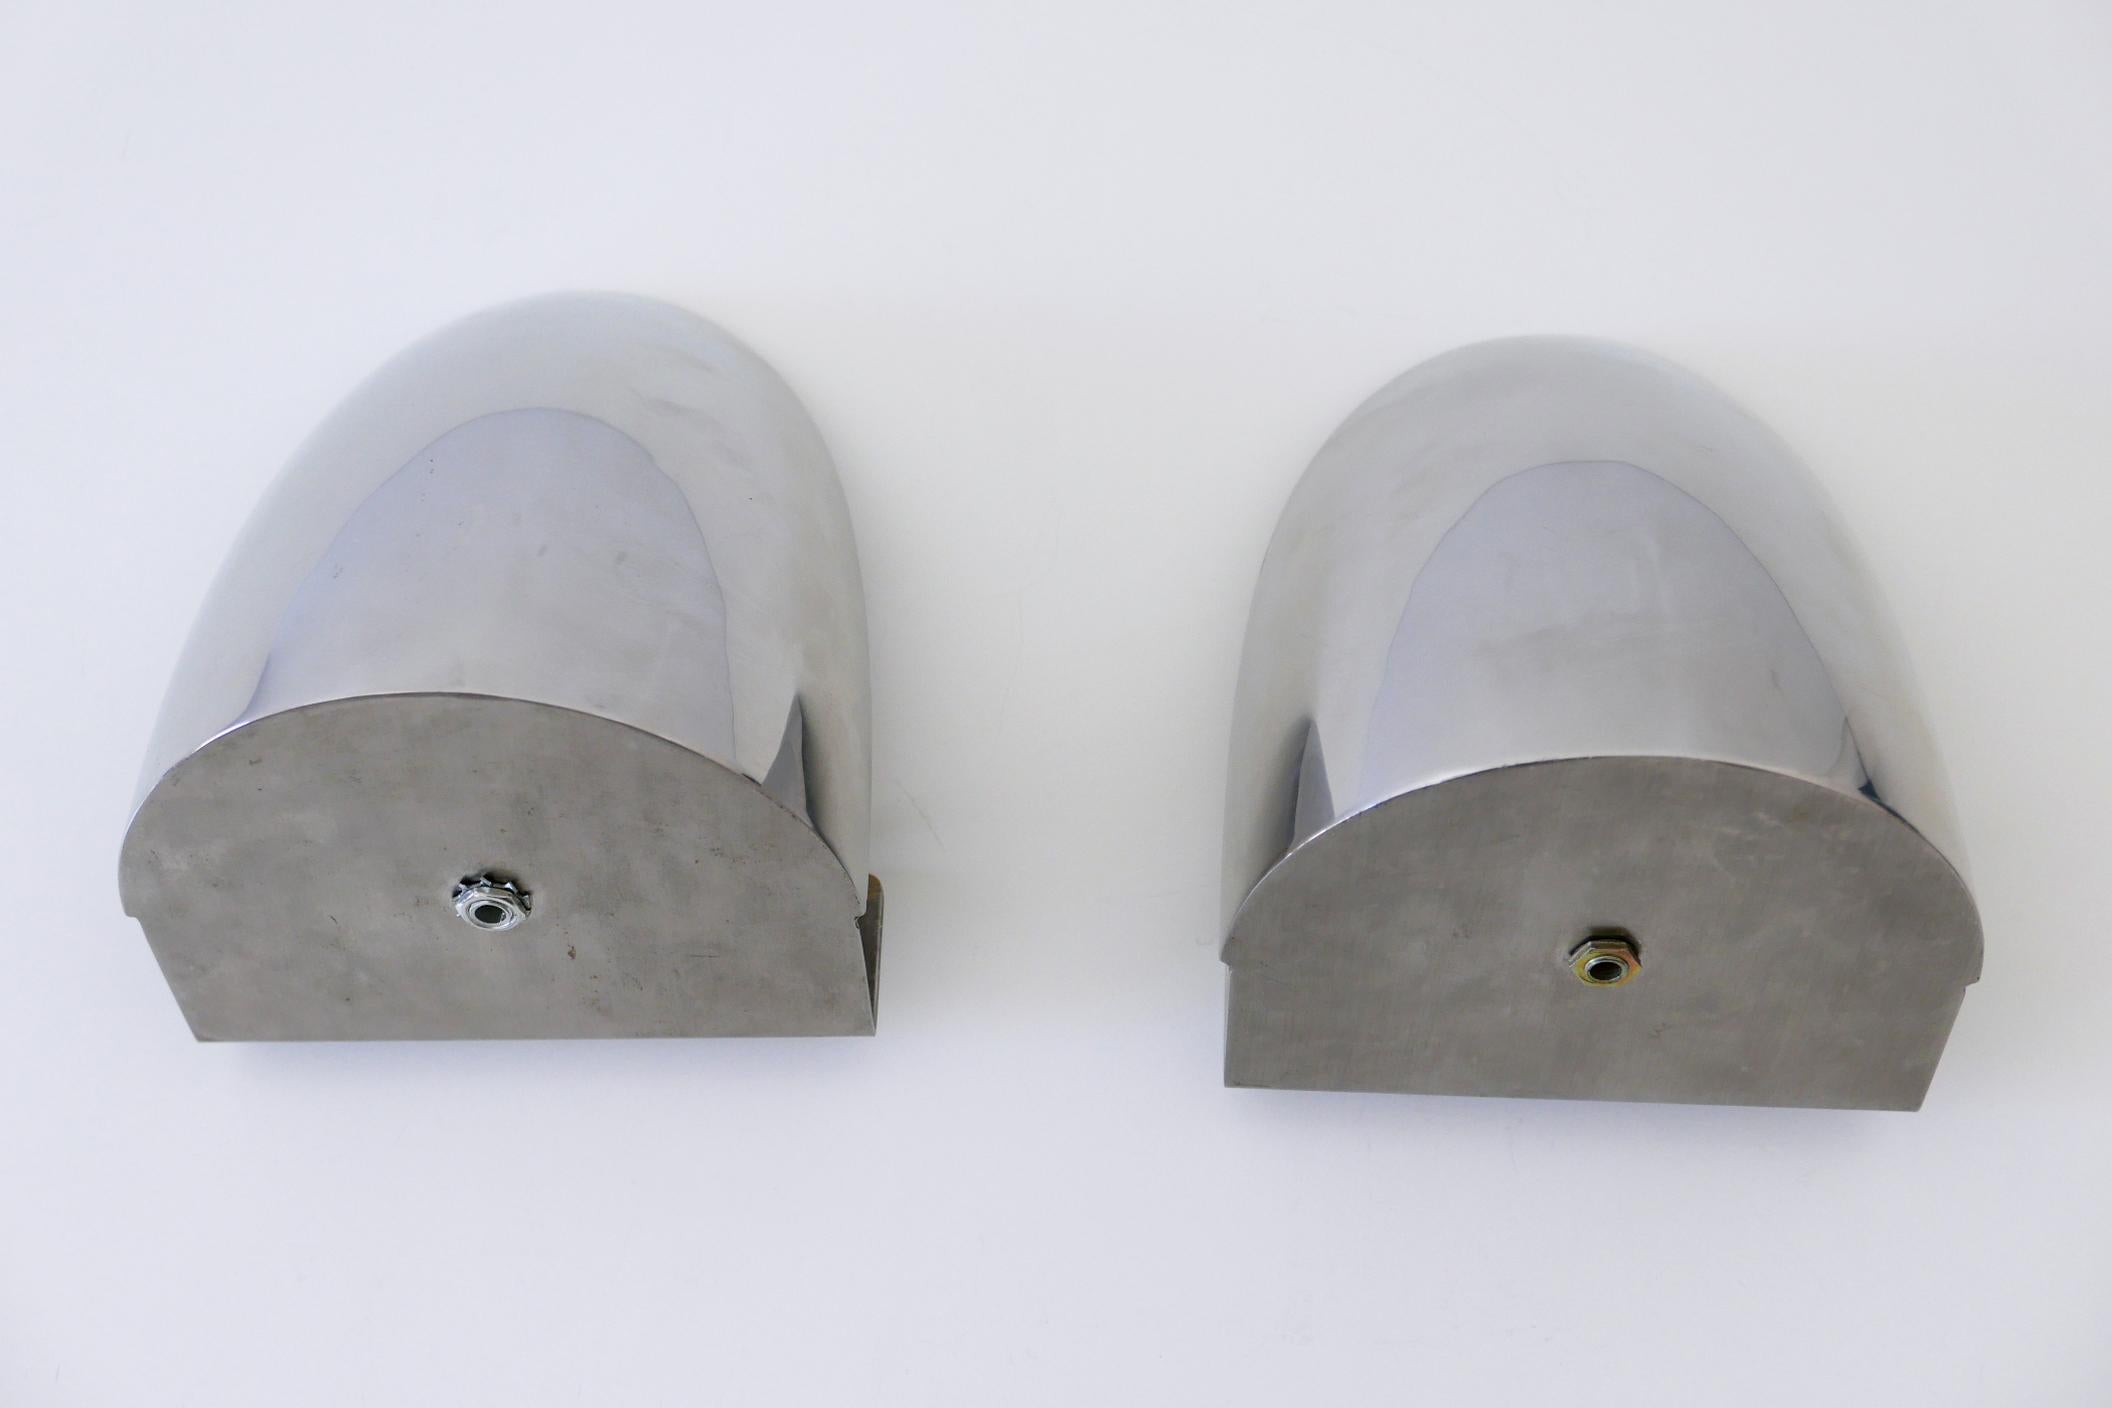 Set of Two Mid-Century Modern Wall Lamps or Sconces, 1970s, Germany For Sale 12